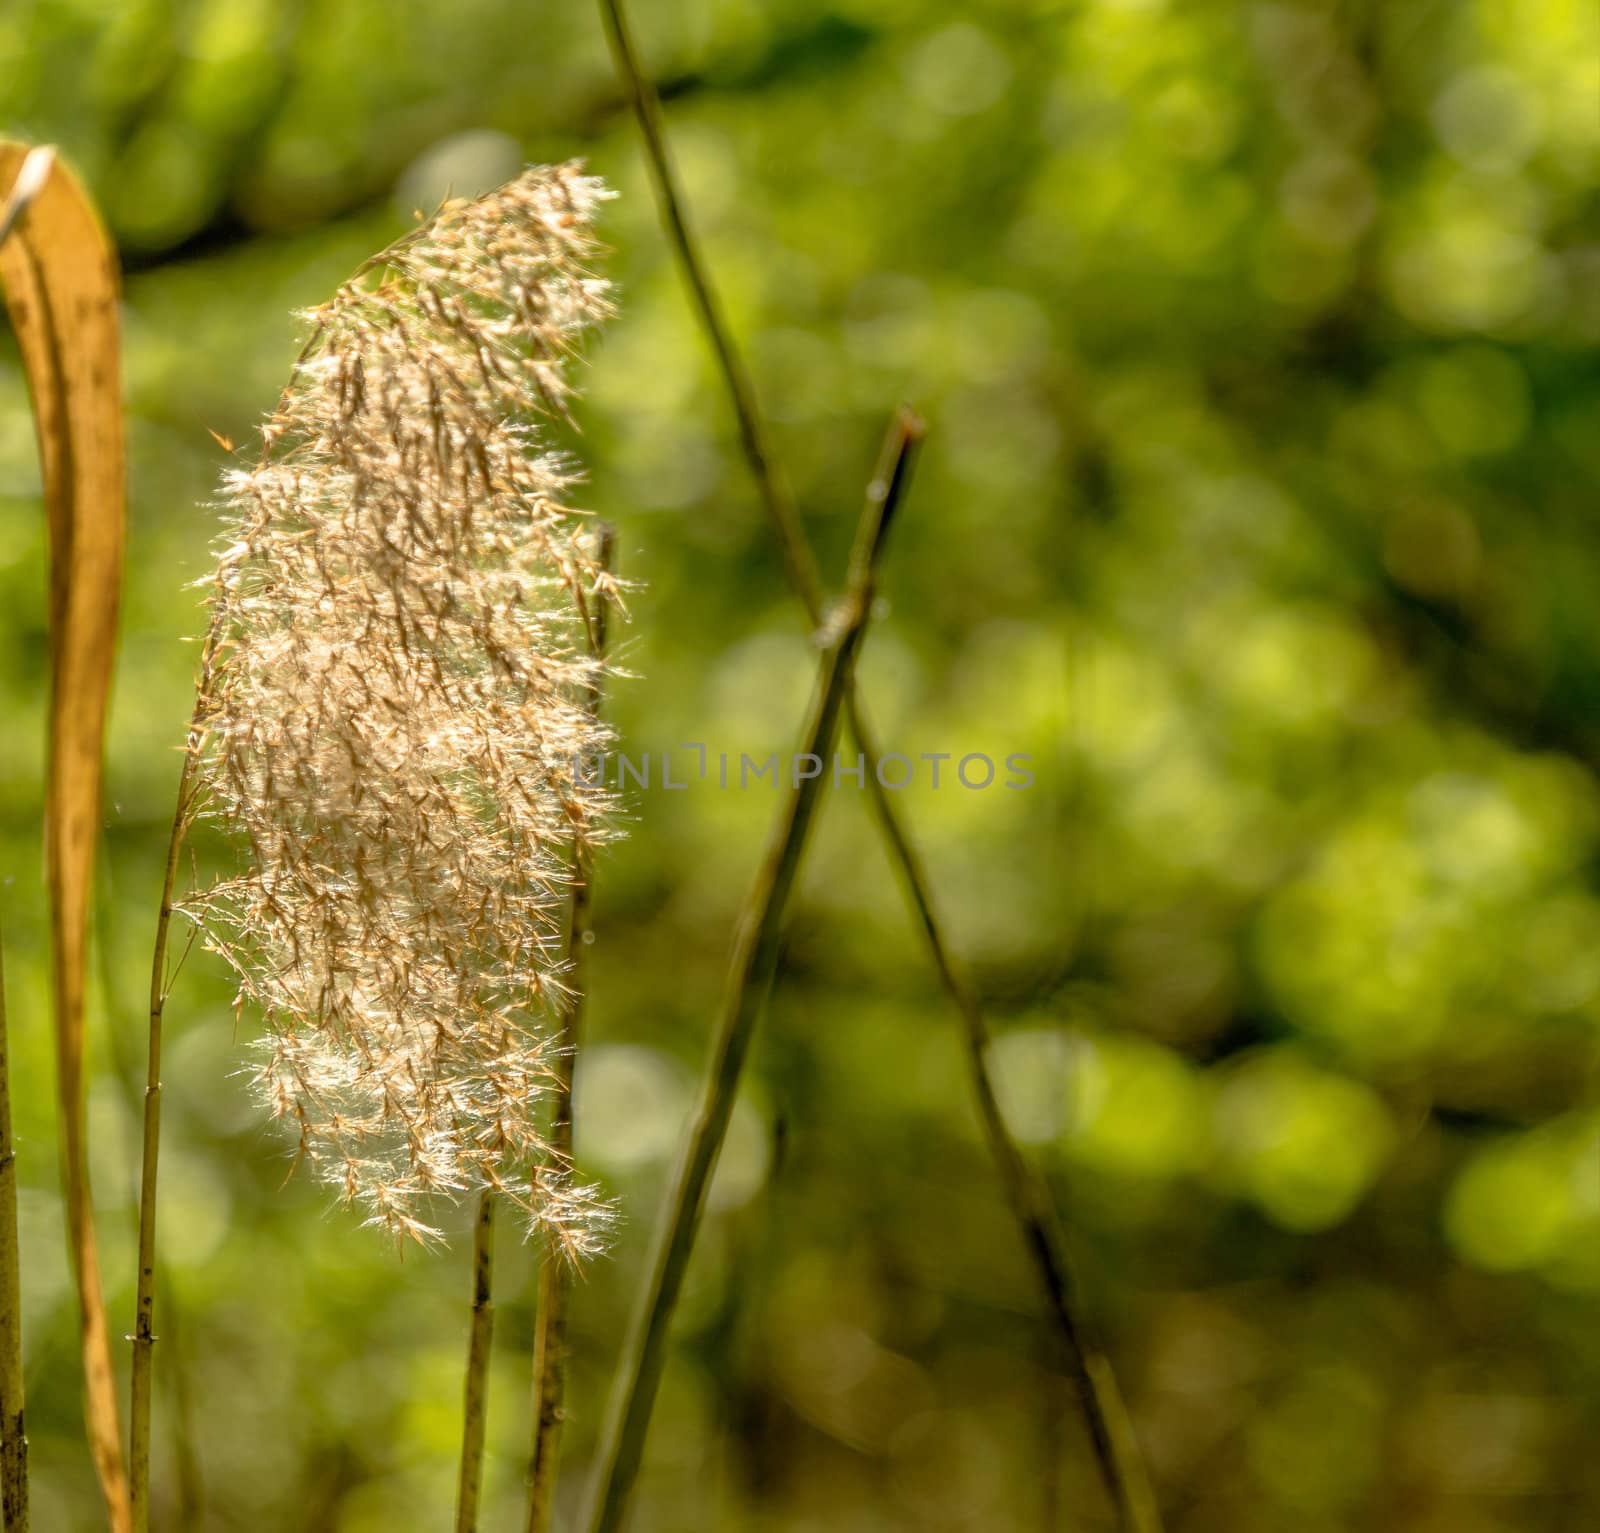 Blooming reed (Phragmites) in bright sunshine against an intentionally blurred green background, germany